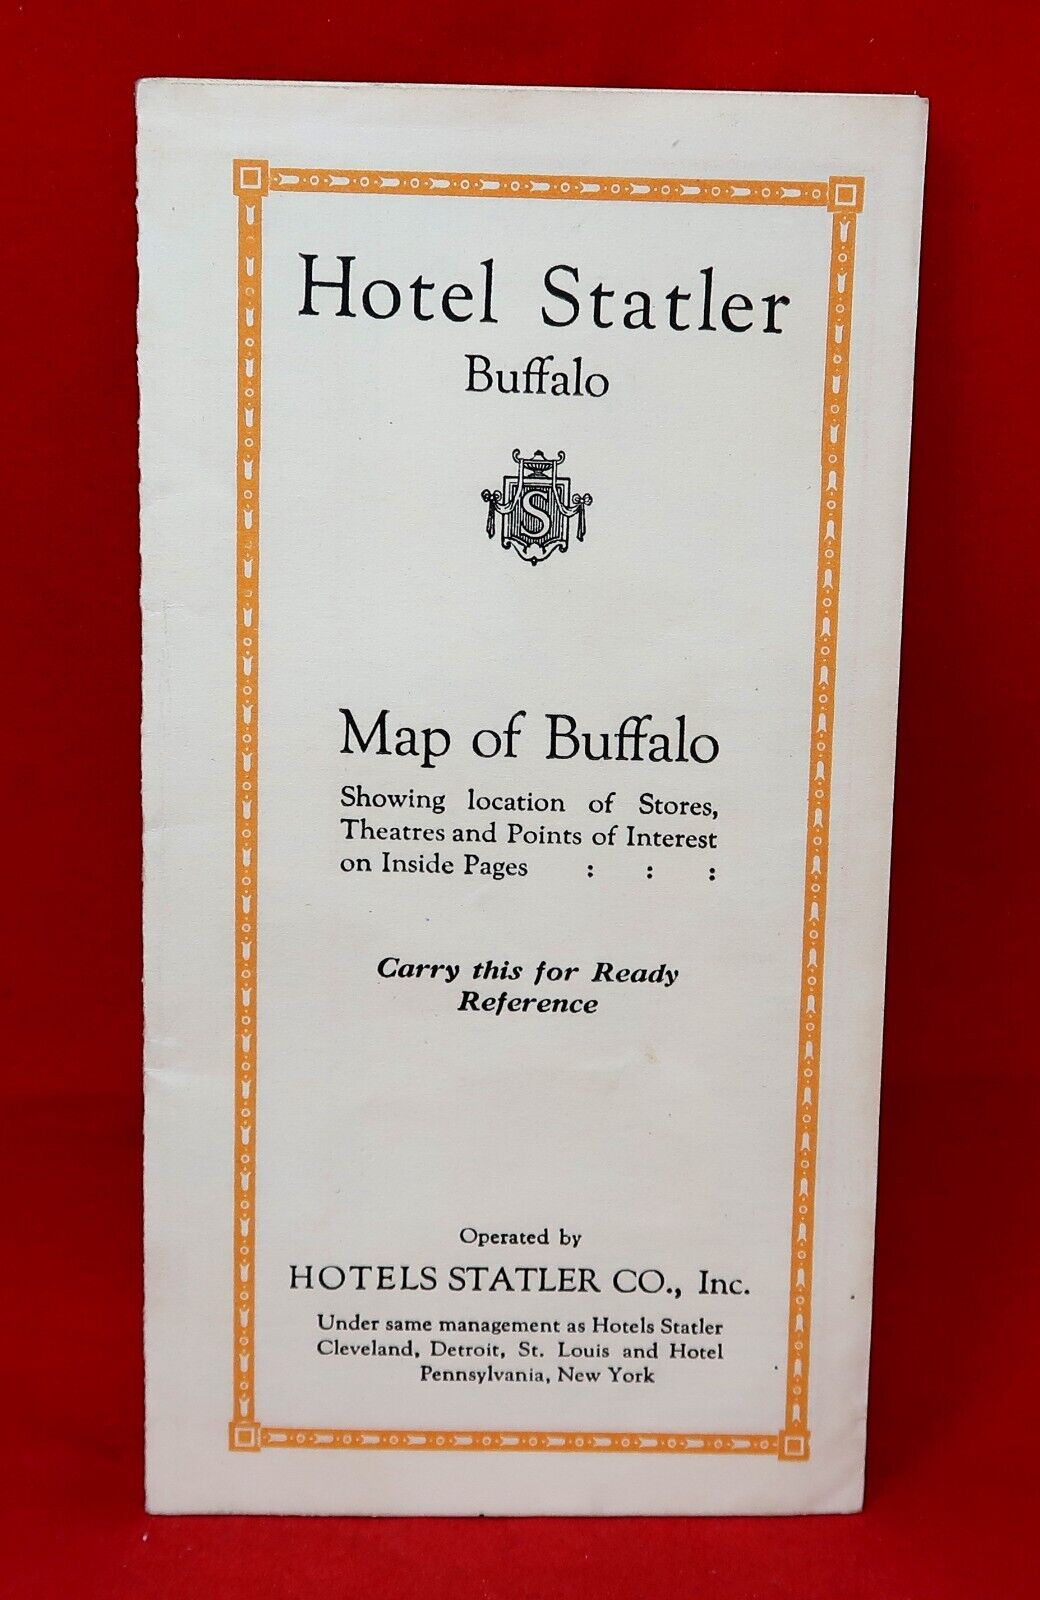 Early 1900's Hotel Statler Co. Map of Buffalo Locations Fold-up Pamphlet